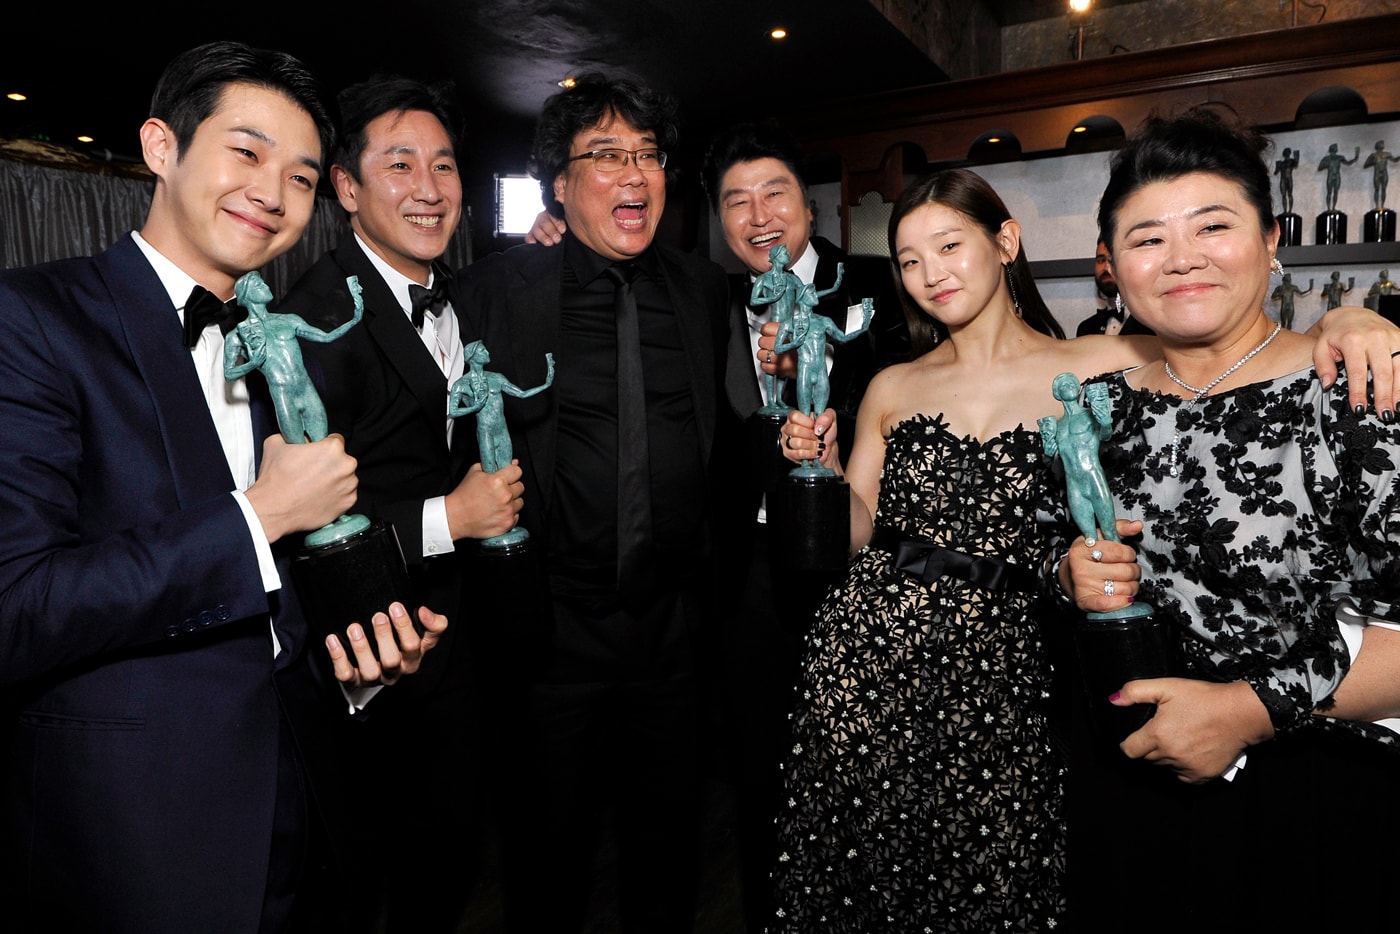 parasite bong joon ho best picture oscars academy awards hulu streaming service exclusive rights 